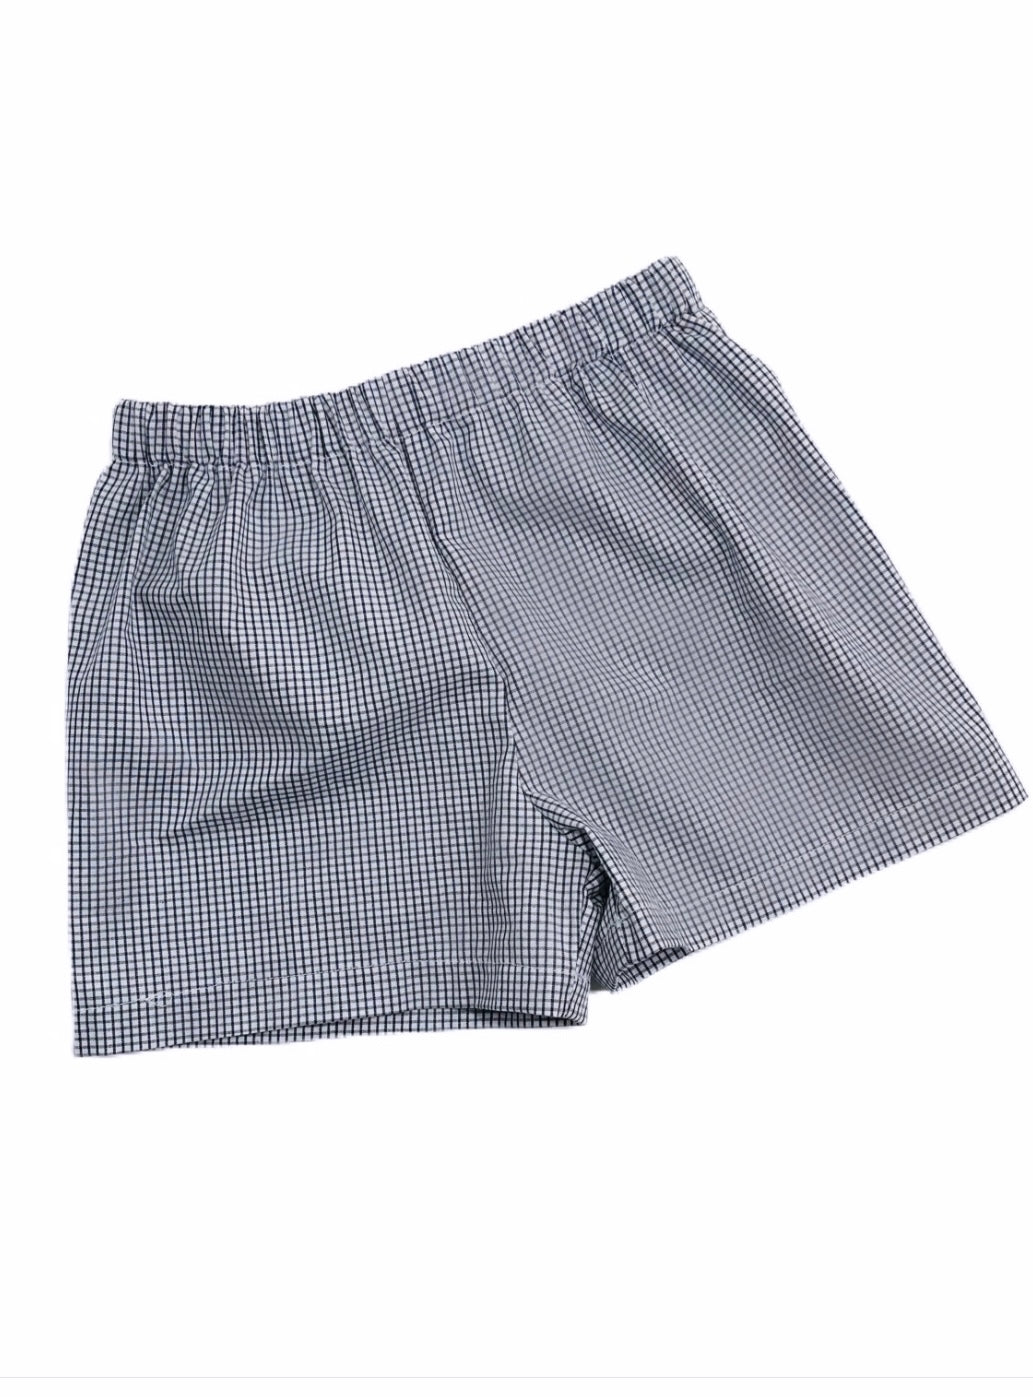 Navy Blue Windowpane Bottoms - Perfectly Playful Designs